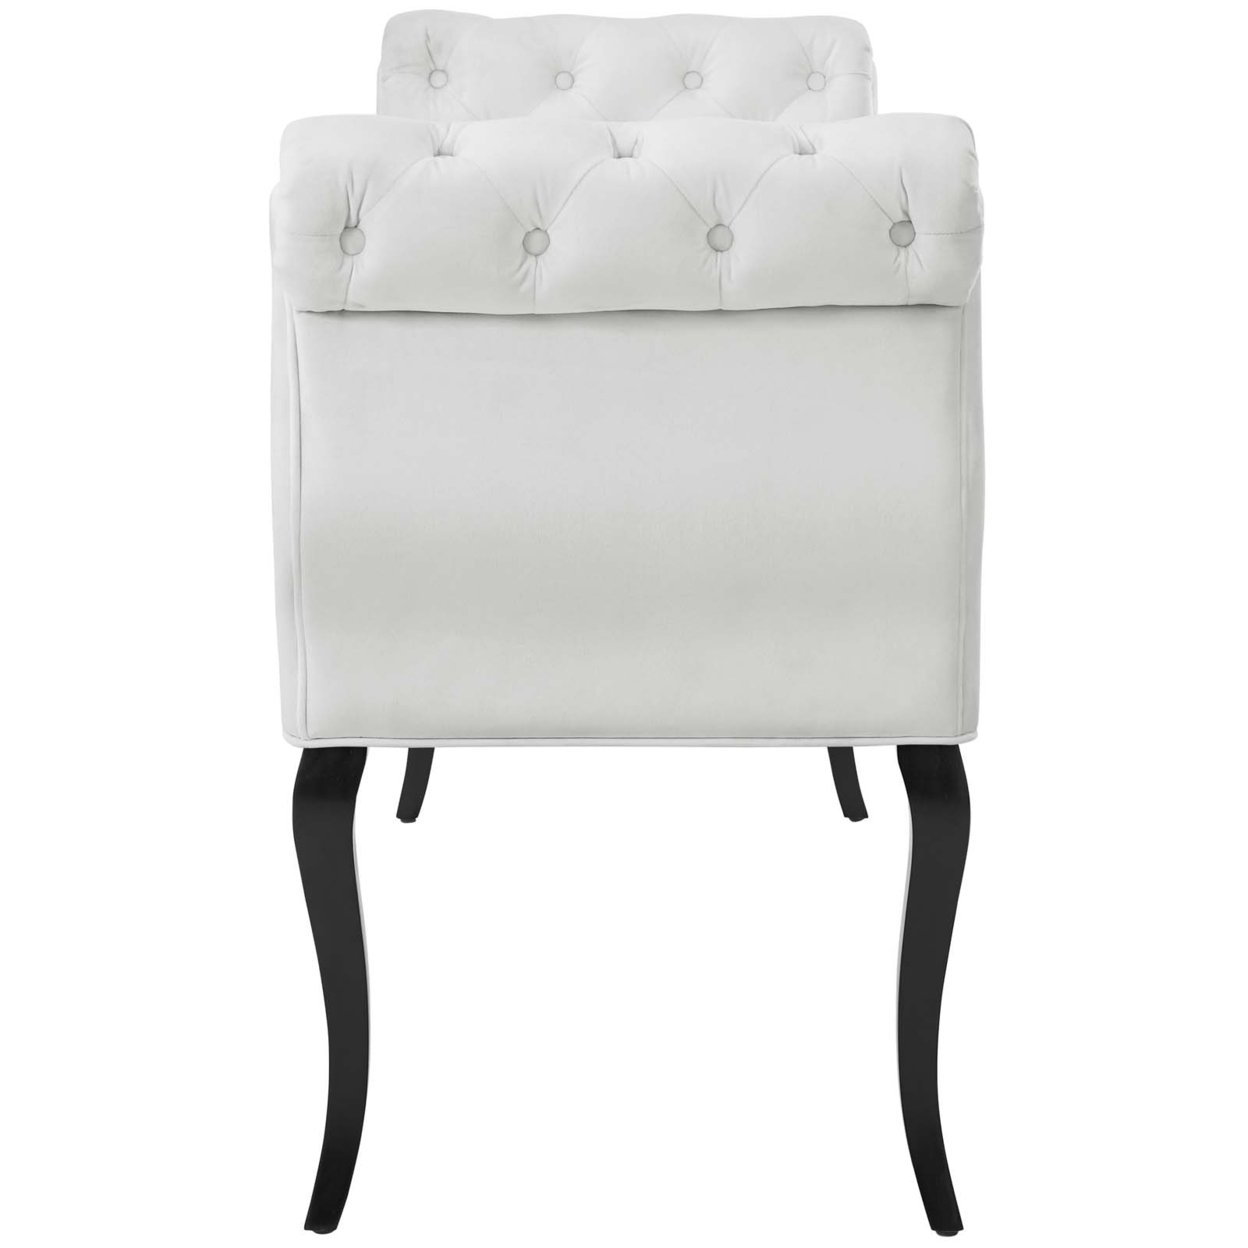 Adelia Chesterfield Style Button Tufted Performance Velvet Bench,White